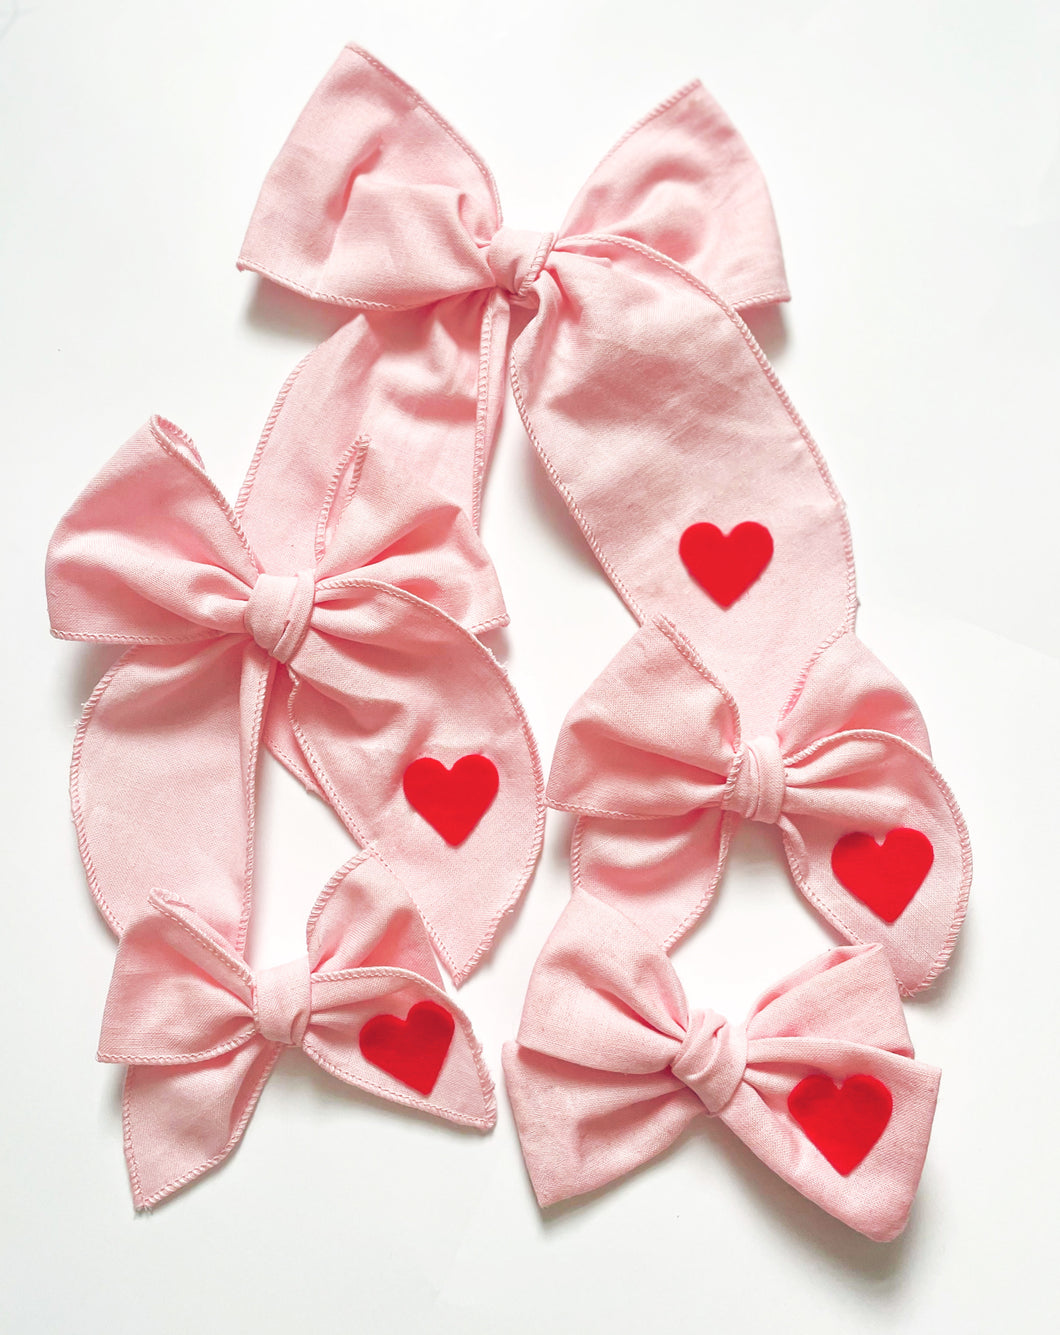 The Pink Valentine's Heart Bow